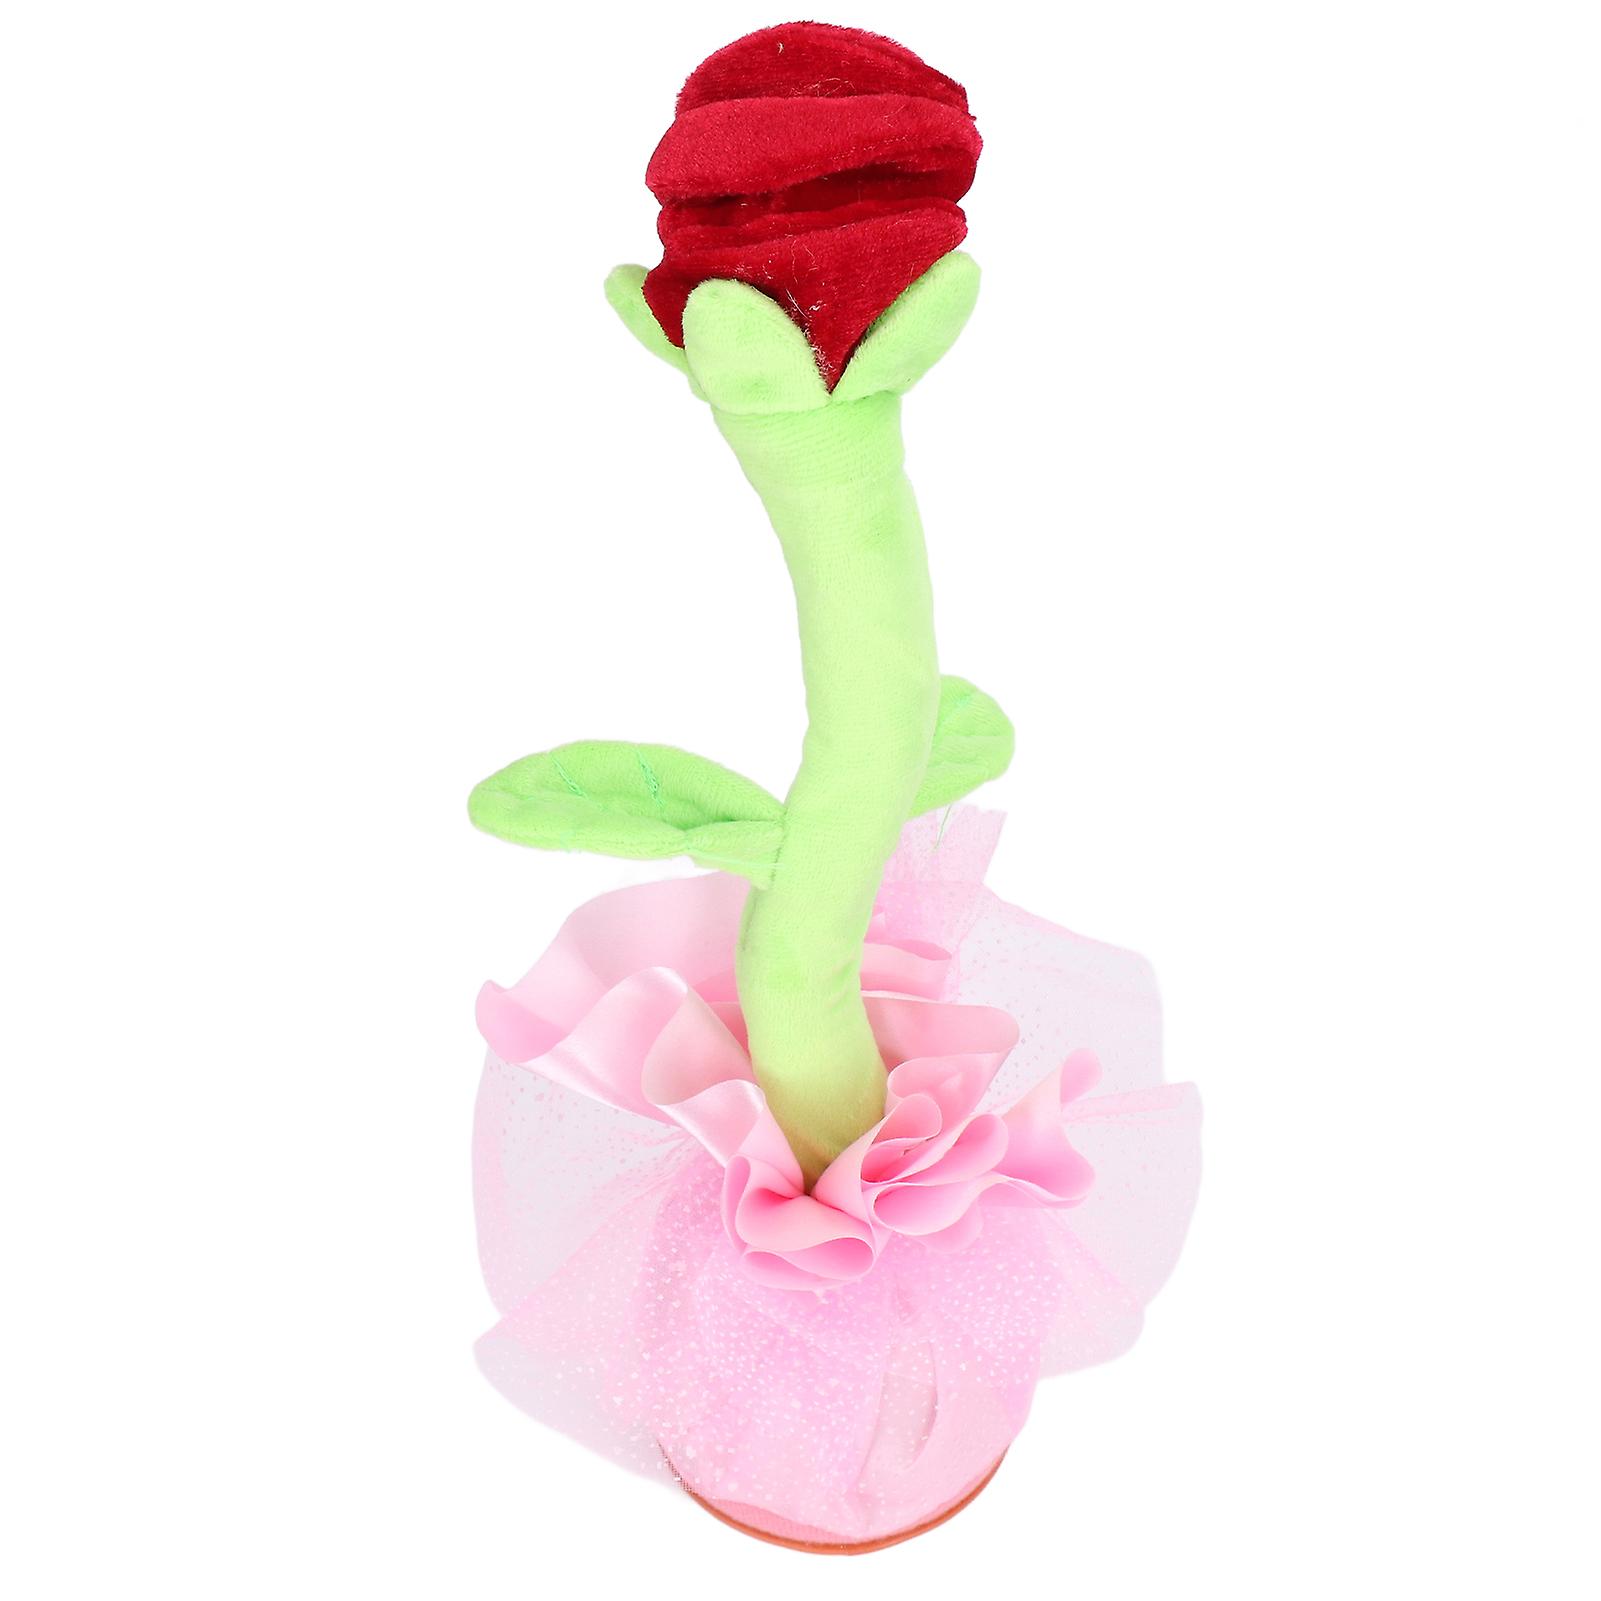 Singing Flower Simulation Sound Recording Repeating Electronic Dancing Talking Rose Flower Toy For 3 Years Old Abovered